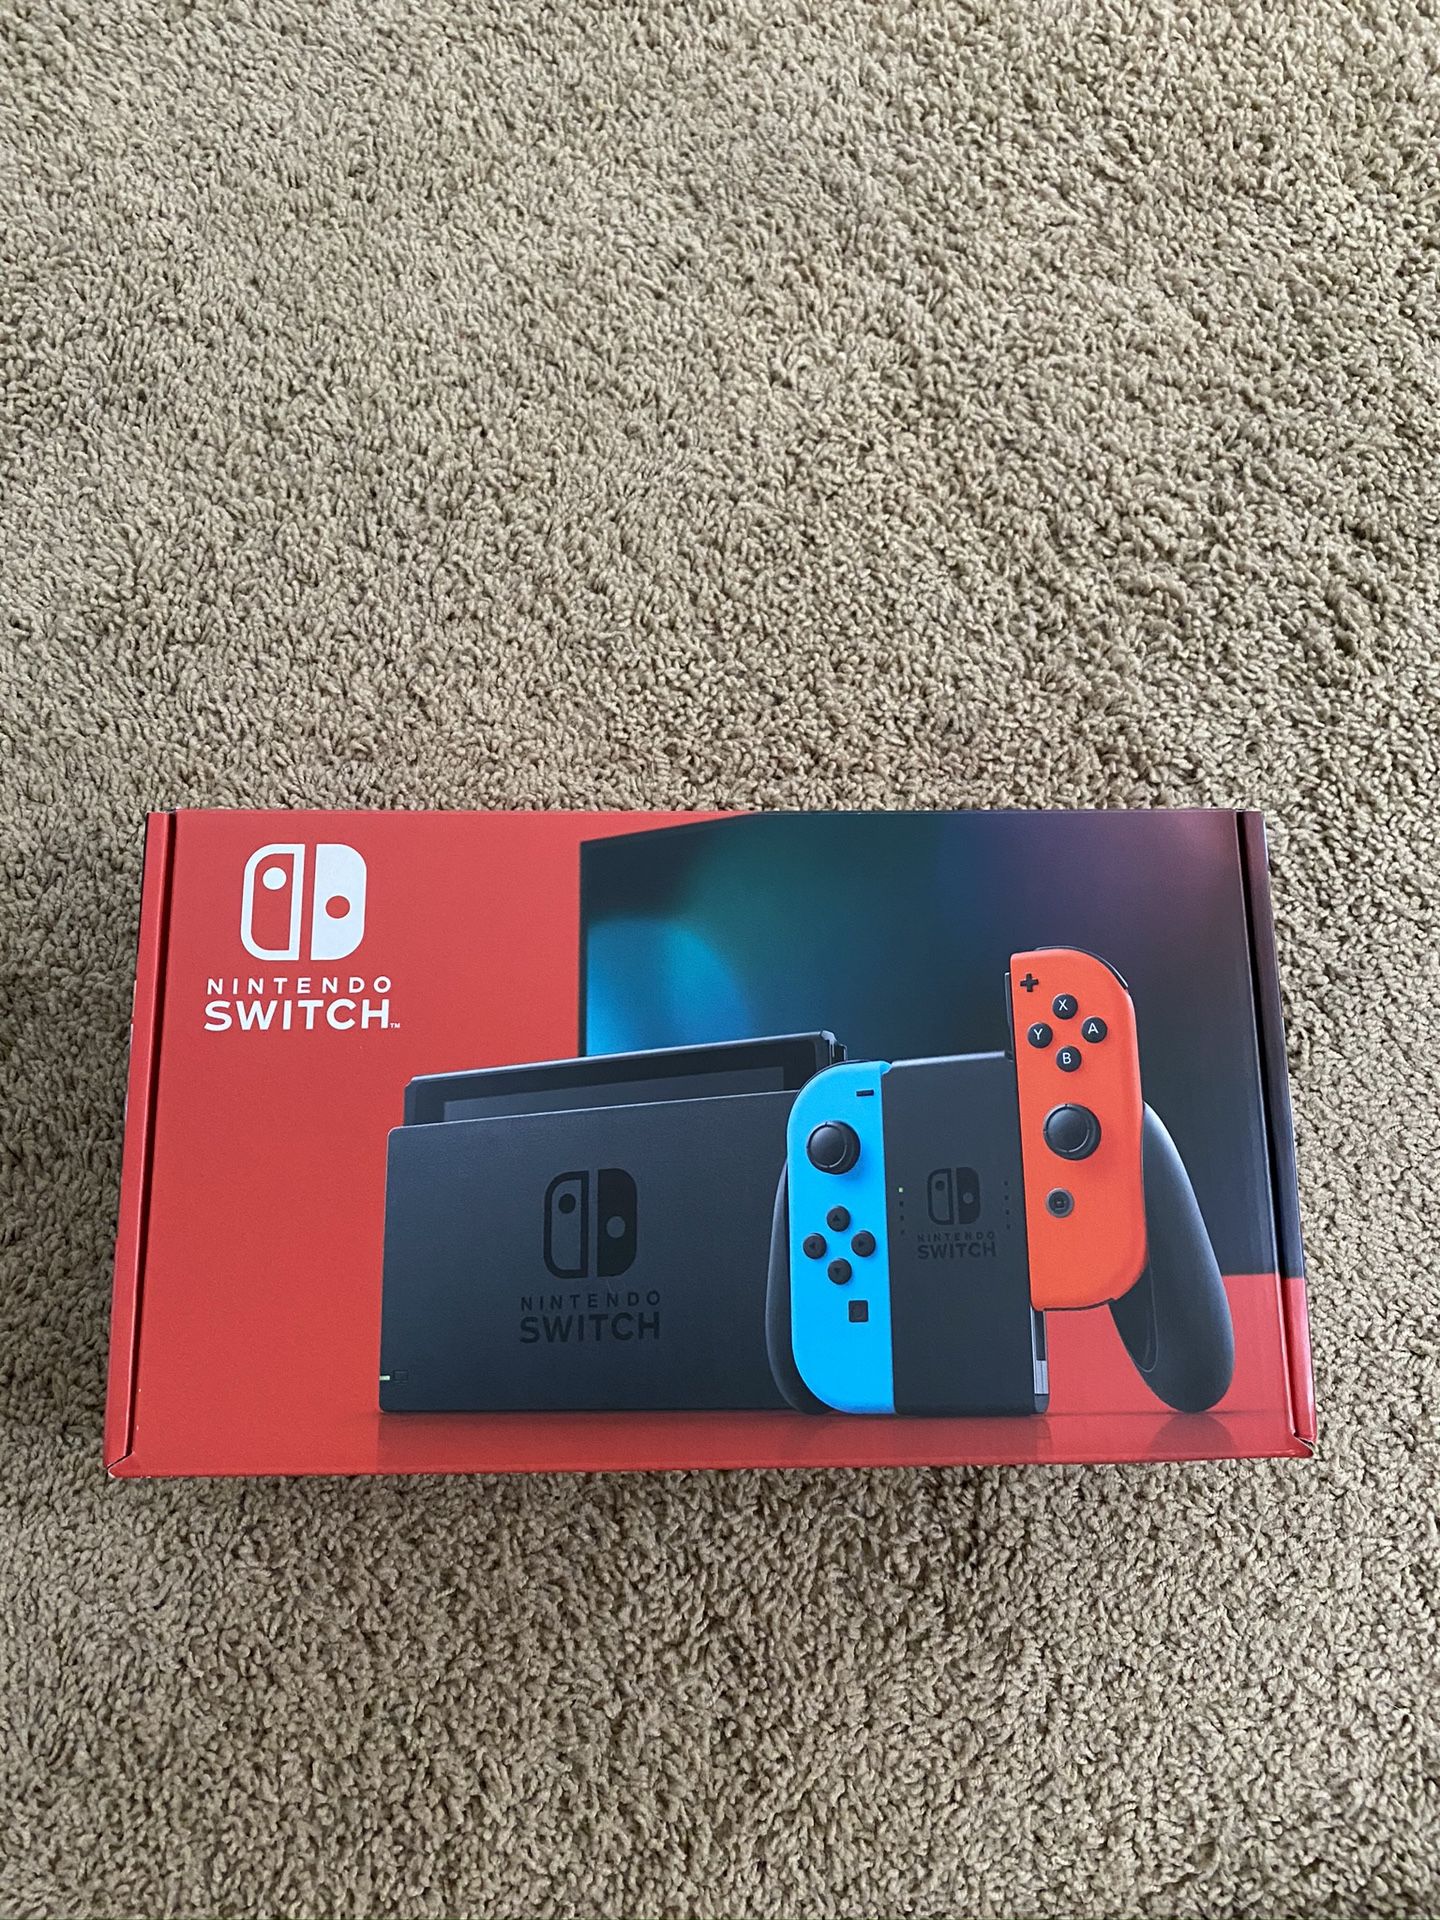 Nintendo Switch Console - Black with Neon Blue and Neon Red Joy-Controller